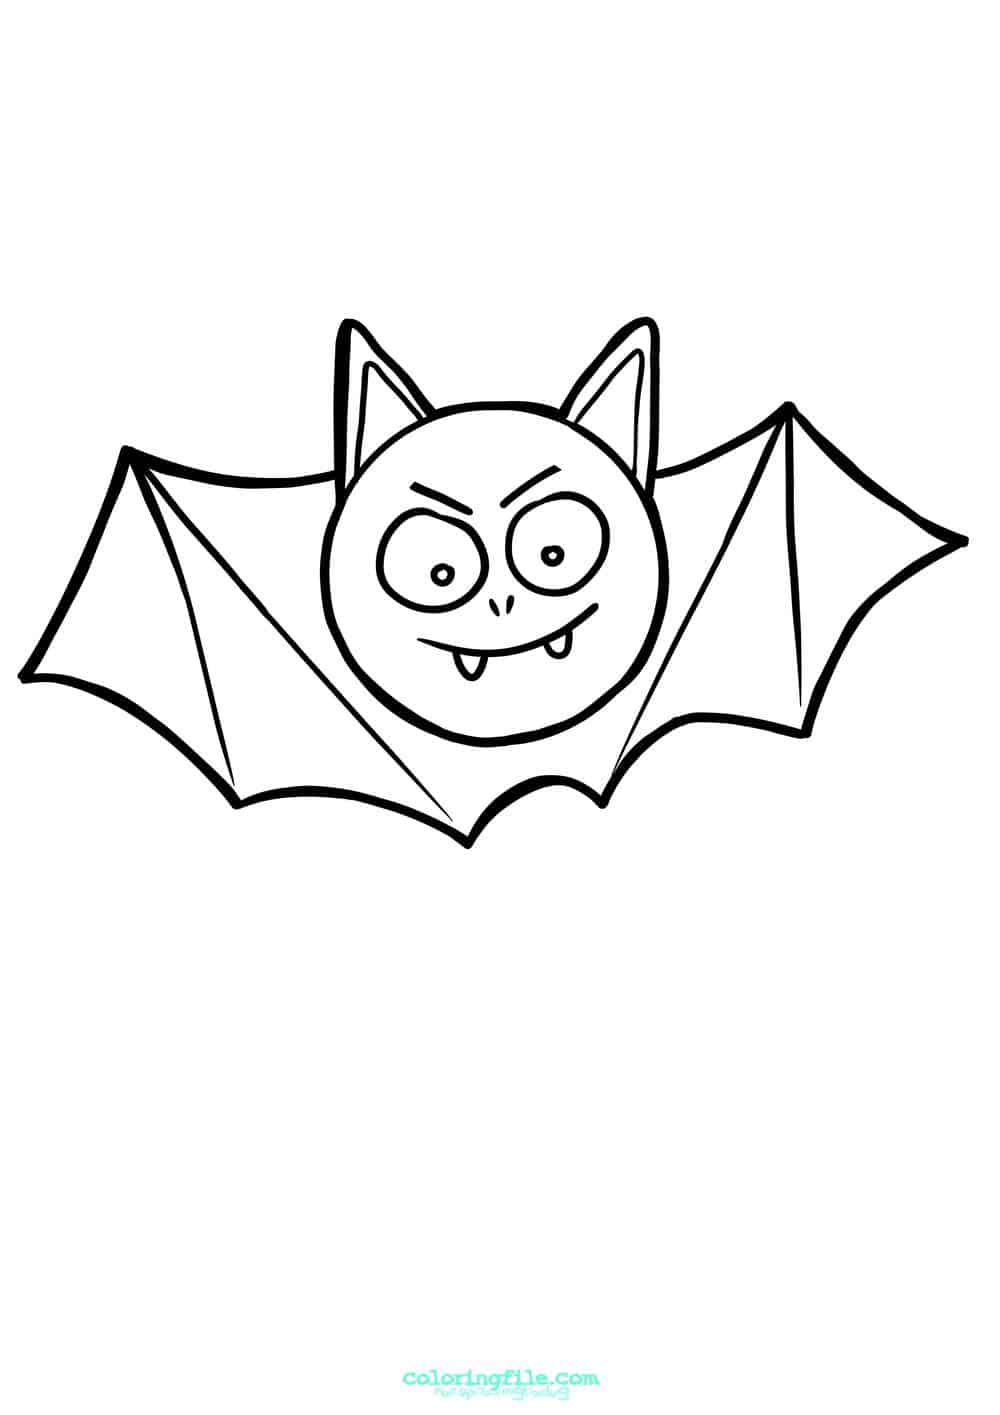 Easy halloween bat coloring pages